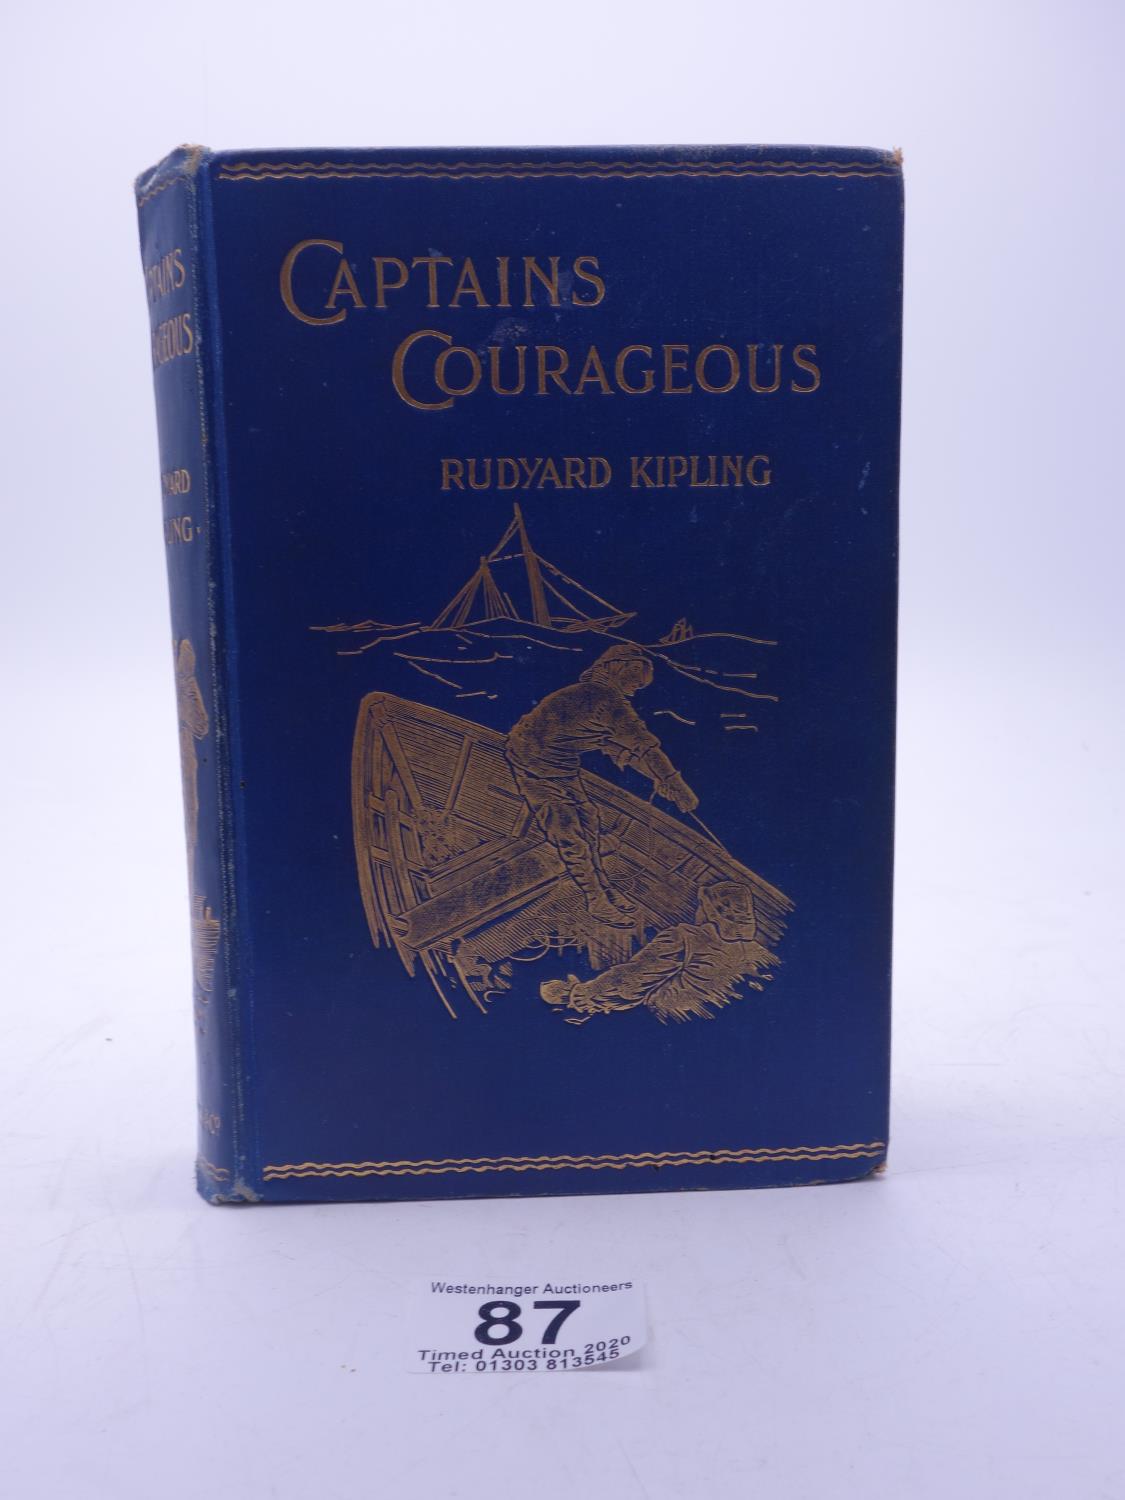 Rudyard Kipling, Captains Courageous, hard bound copy published by Macmillian & Co, a re-printed - Image 2 of 5